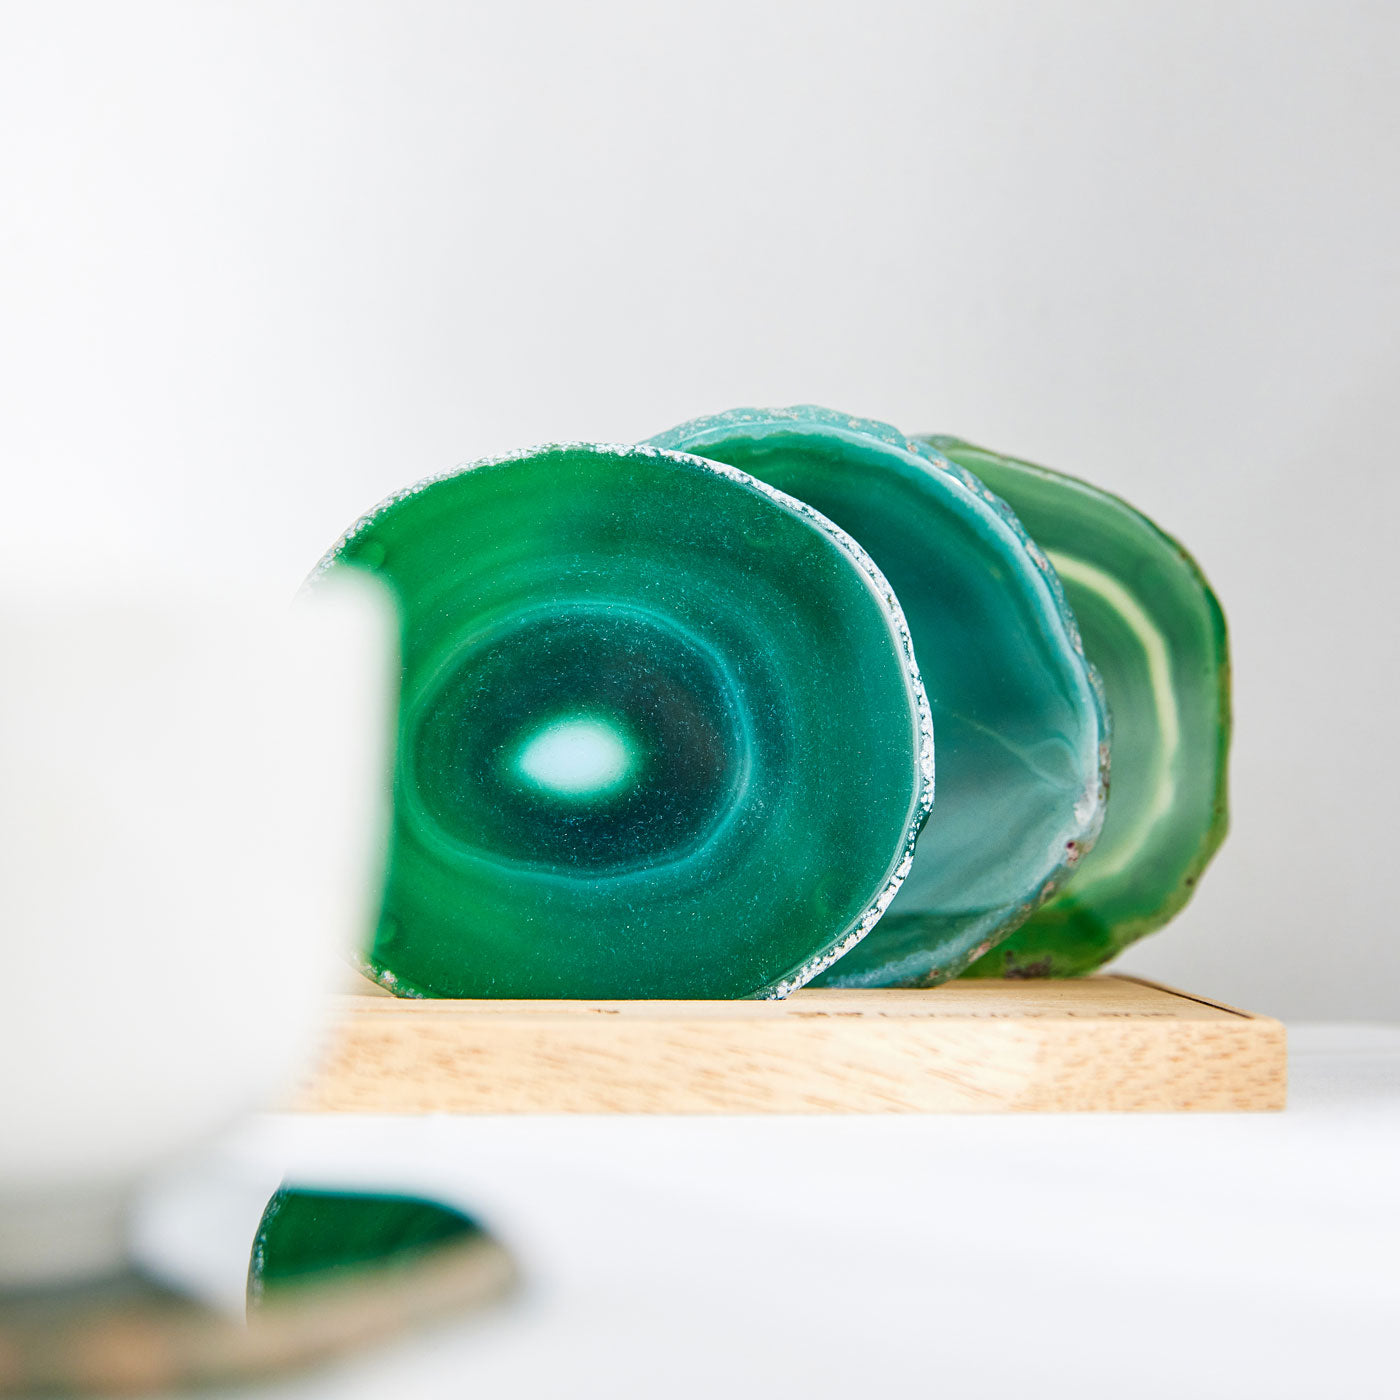 Set of 4 Natural Brazilian Agate Drink Coasters with Wood Holder - Emerald